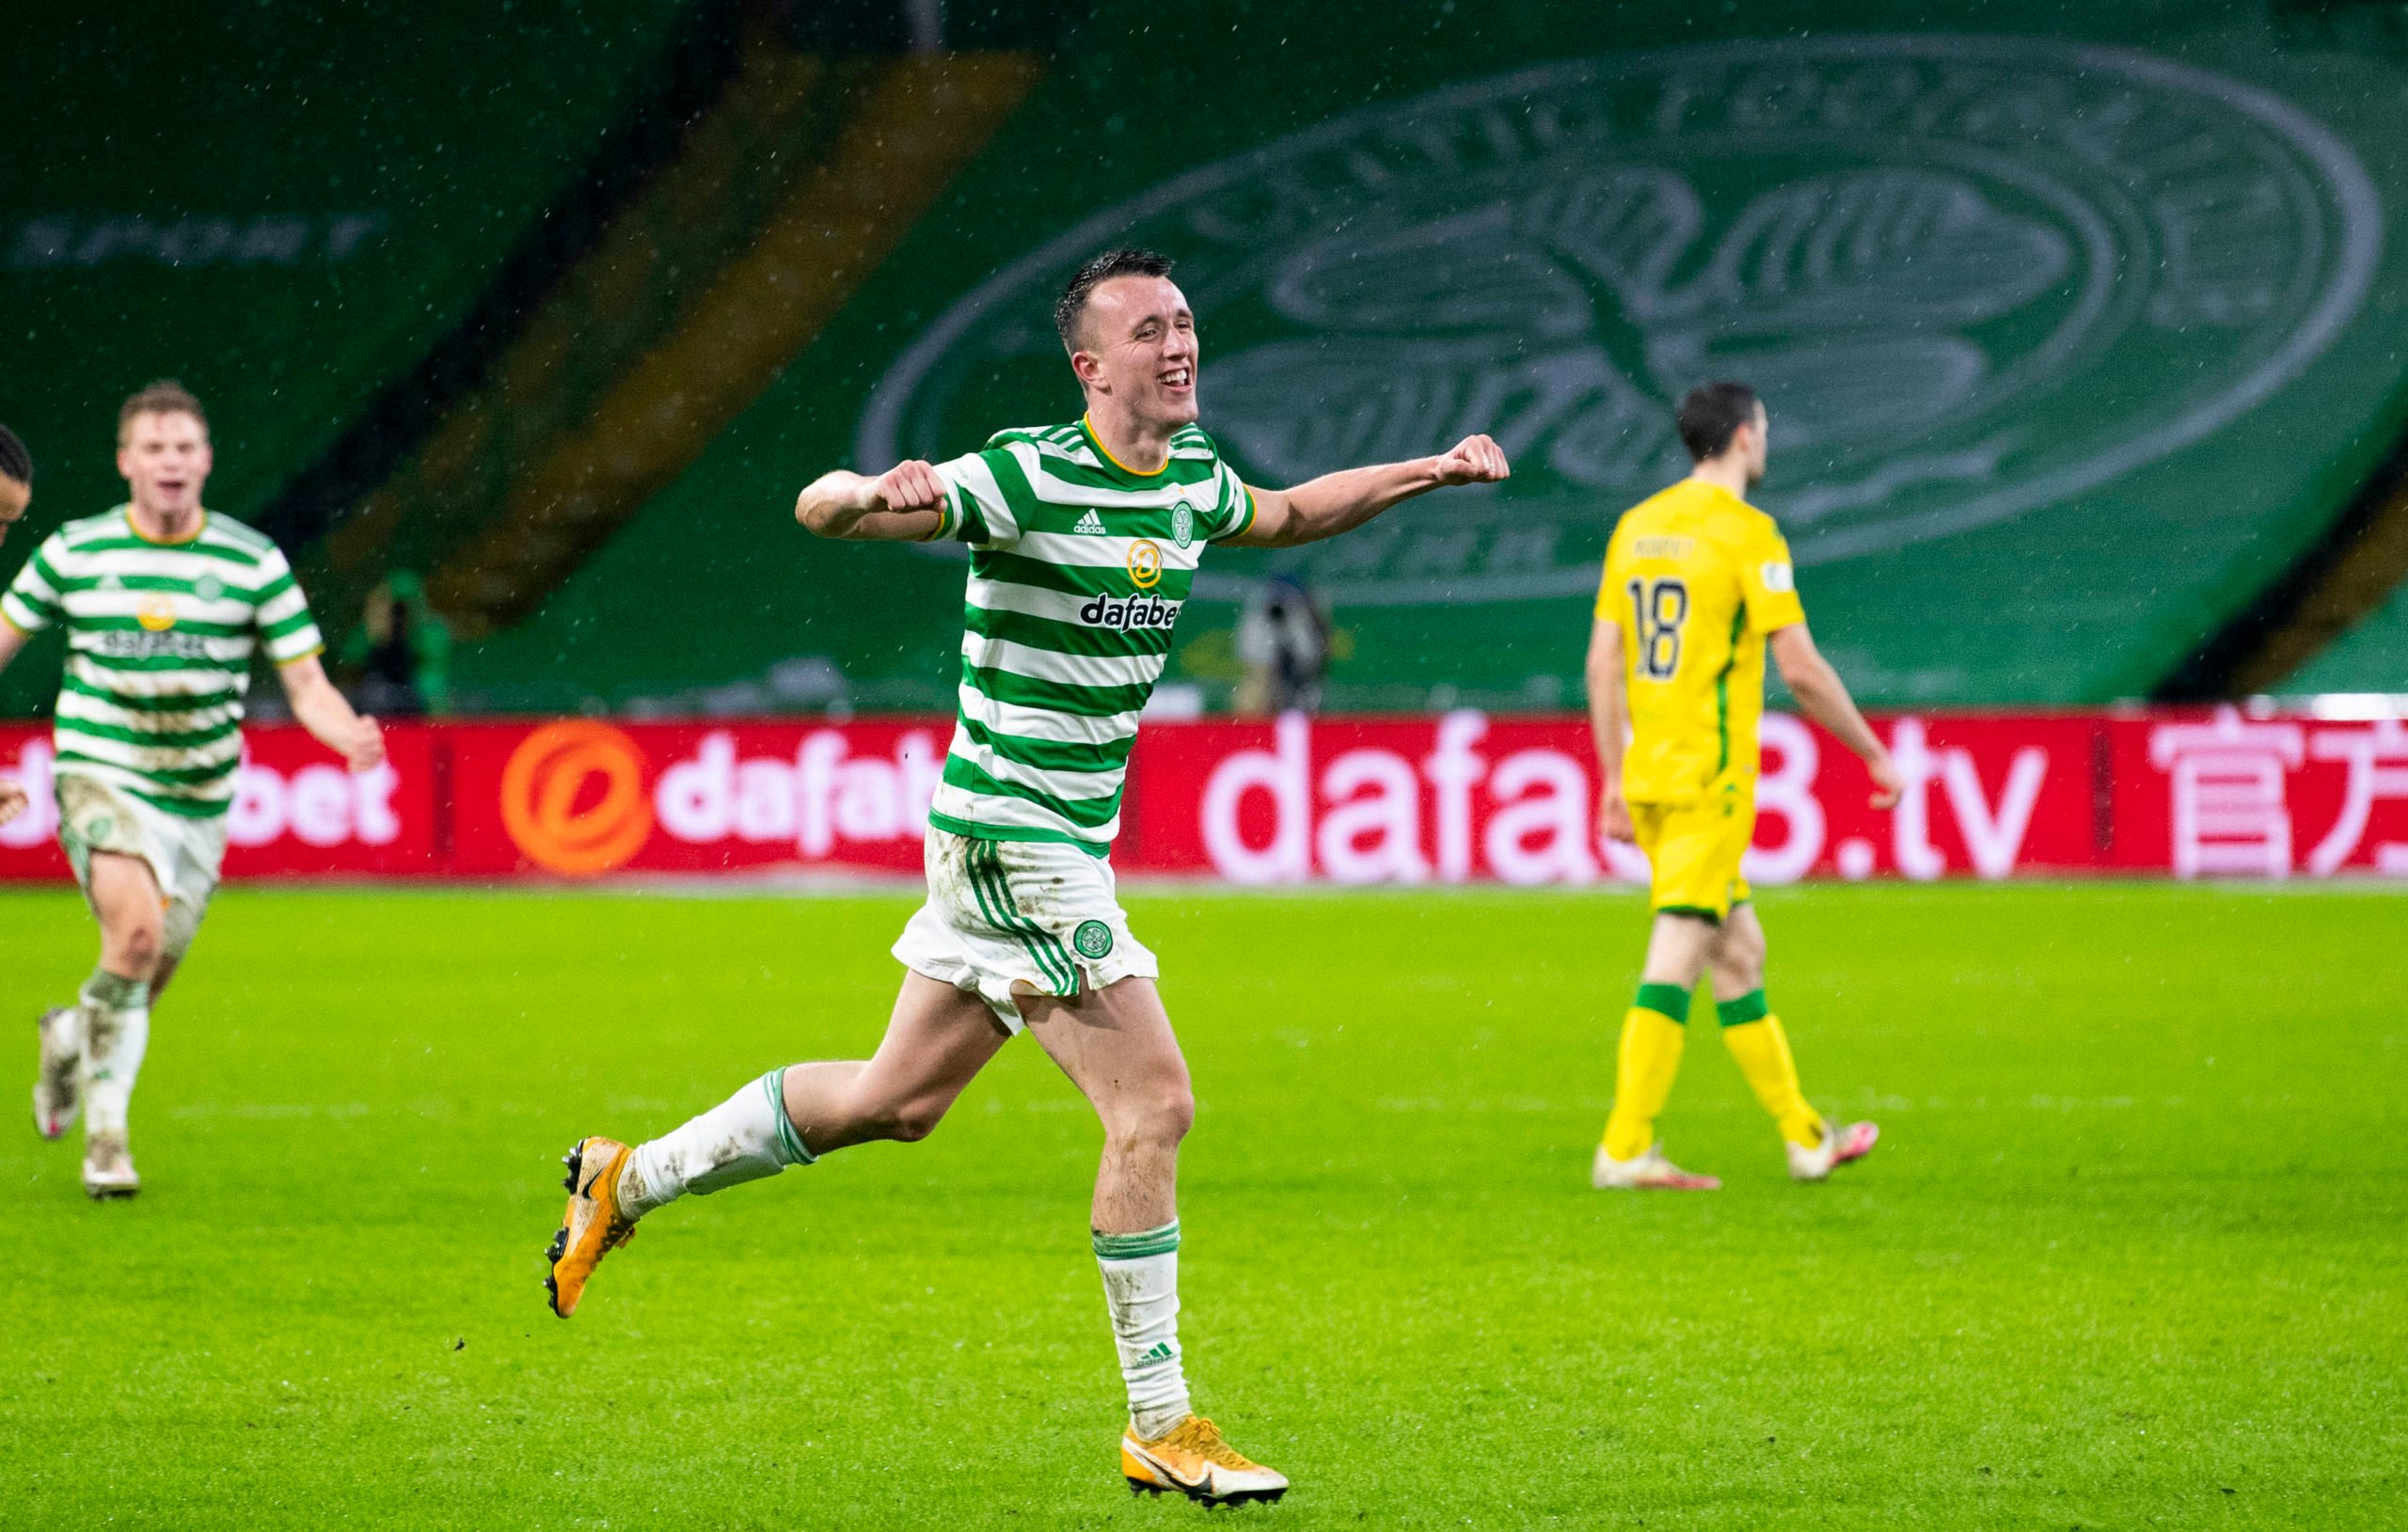 Turnbull exploits impress Celtic supporters on rough night